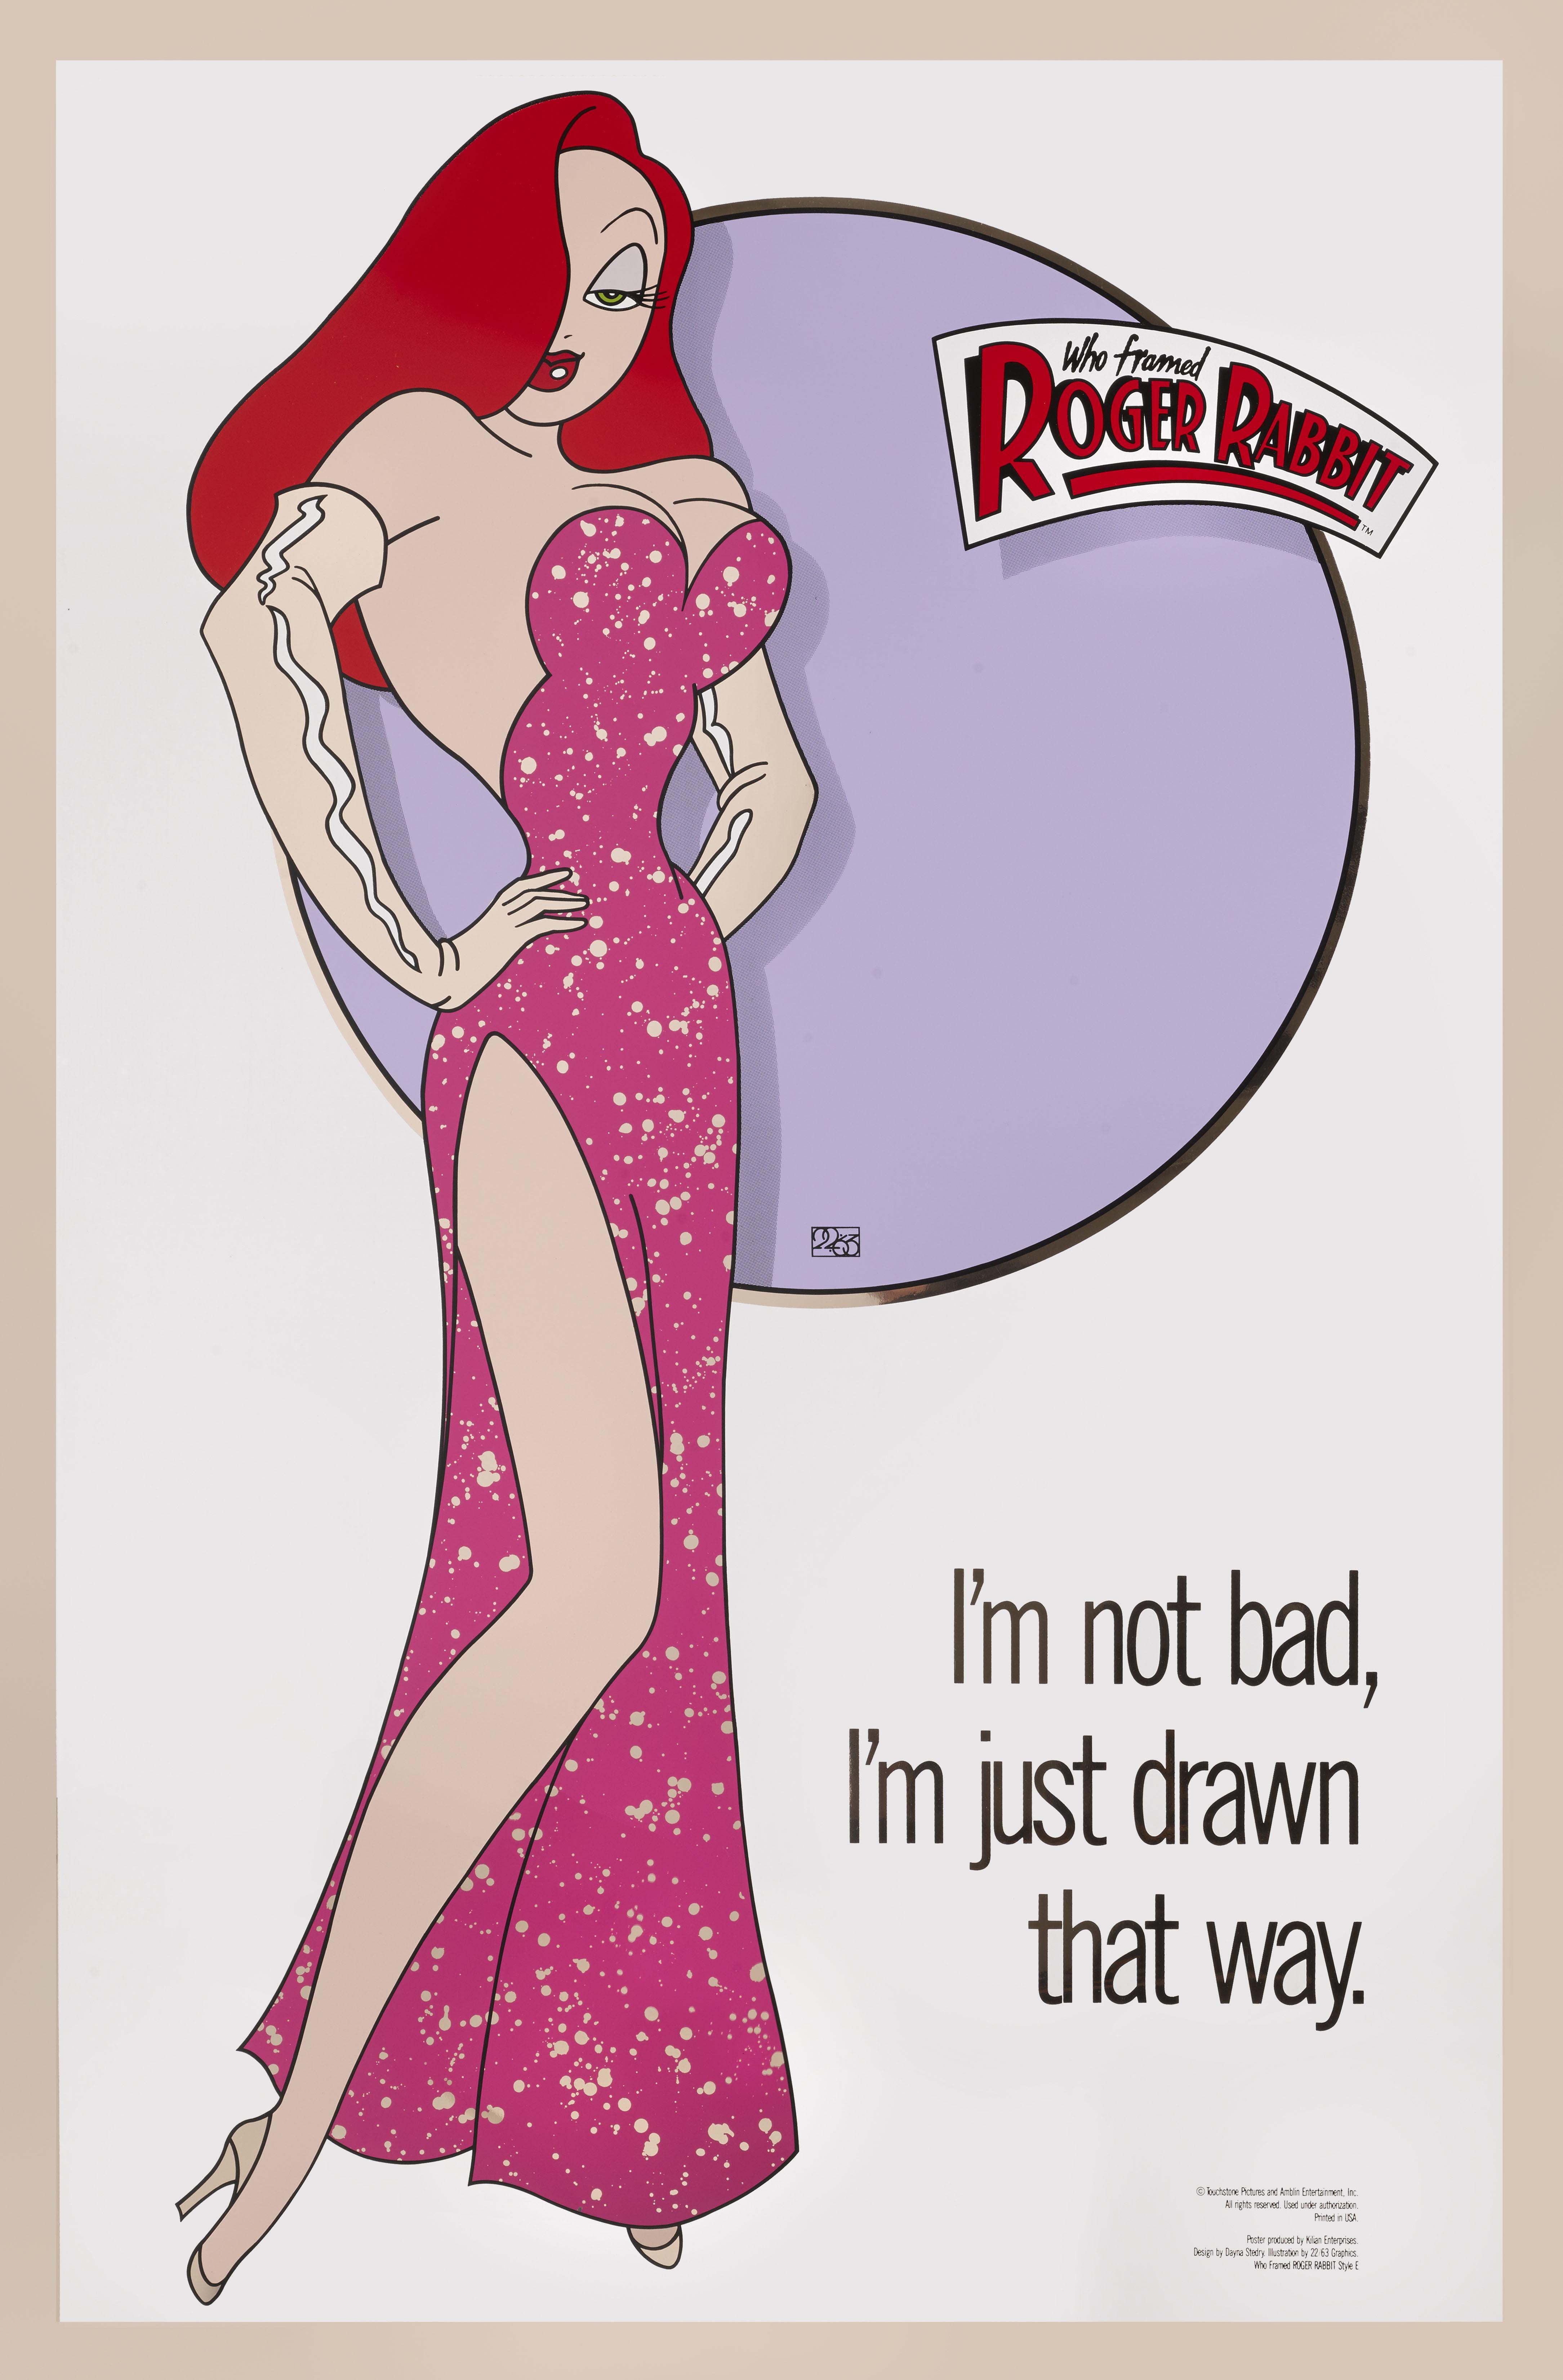 Original US Limited edition of 750 un-numbered (Gold Mylar) poster.
This special foil Gold Mylar poster of Jessica Rabbit with the classic tagline 'I'm not bad, I'm just drawn that way', was created by Kilian Enterprises in 1988 under license from